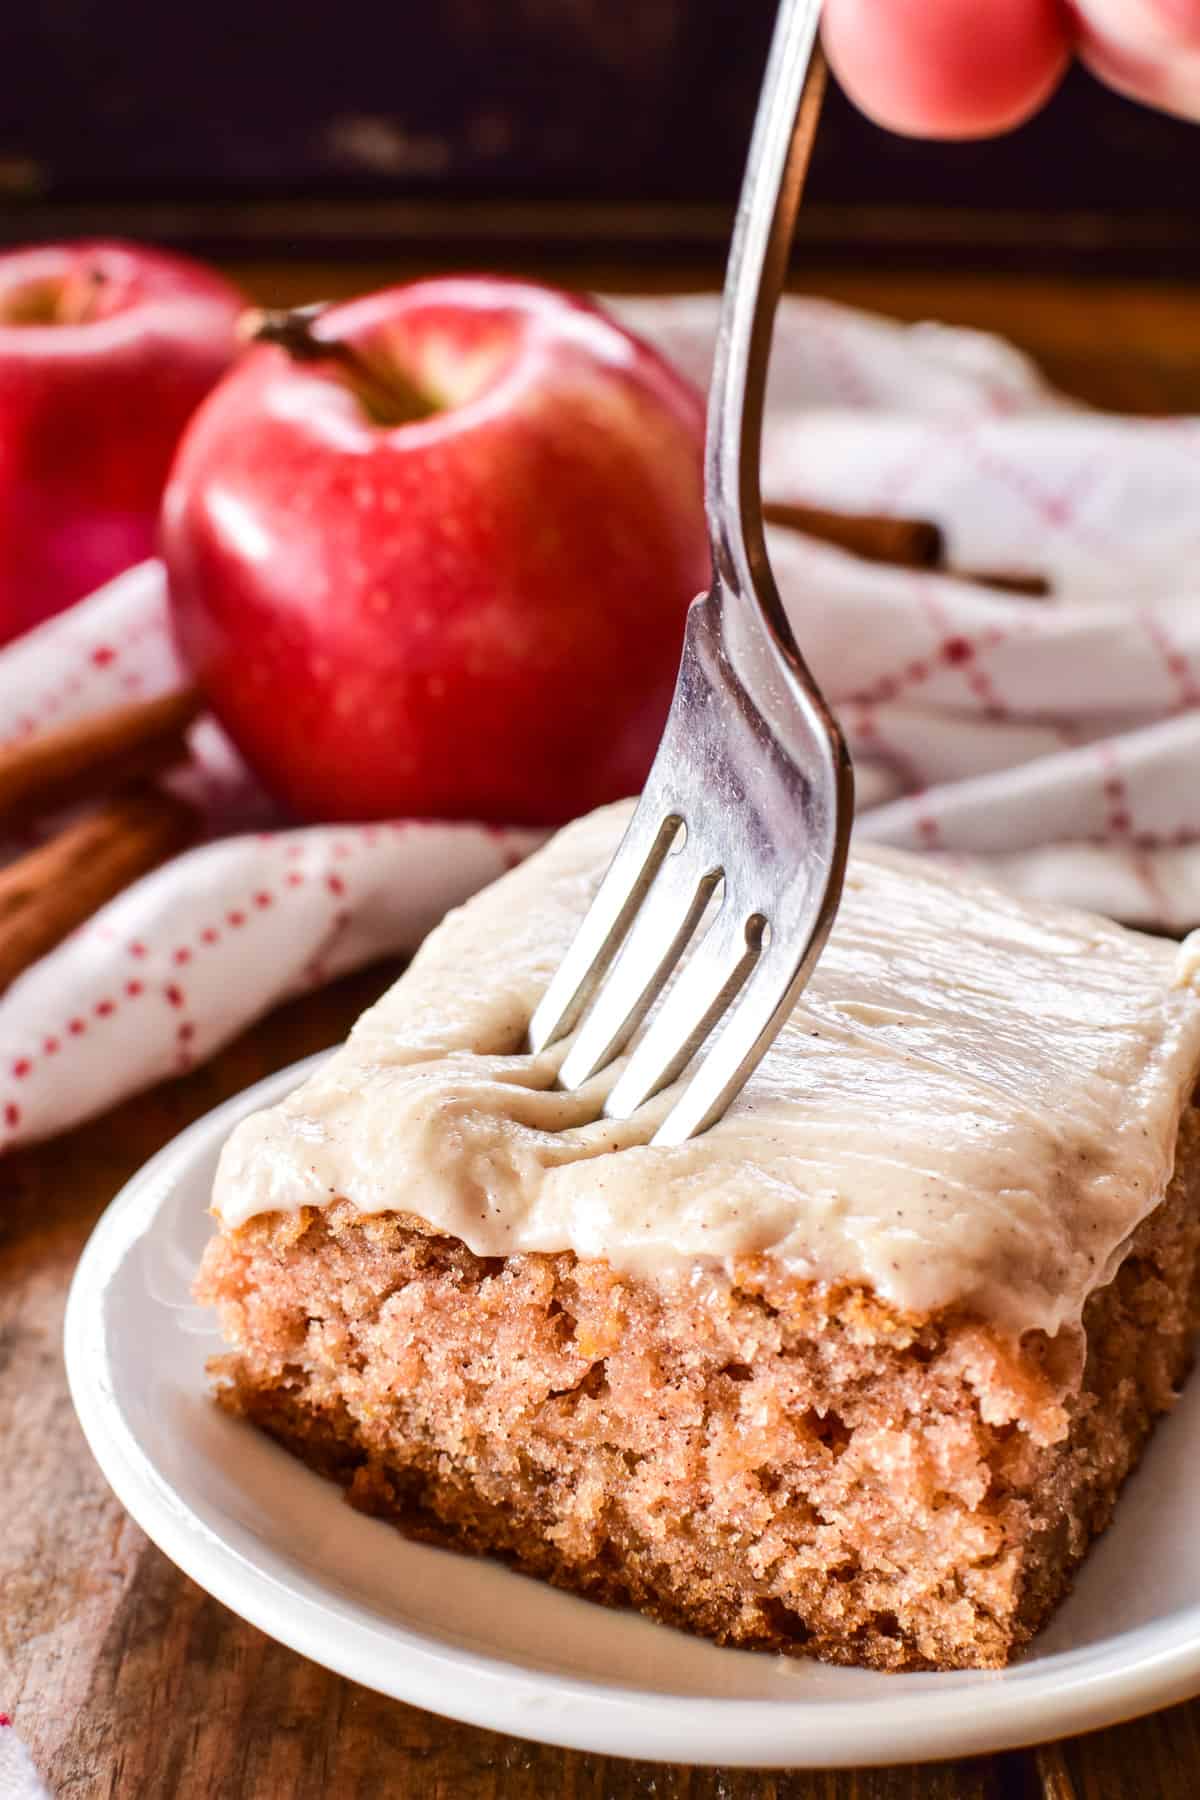 Fork cutting into piece of apple cake